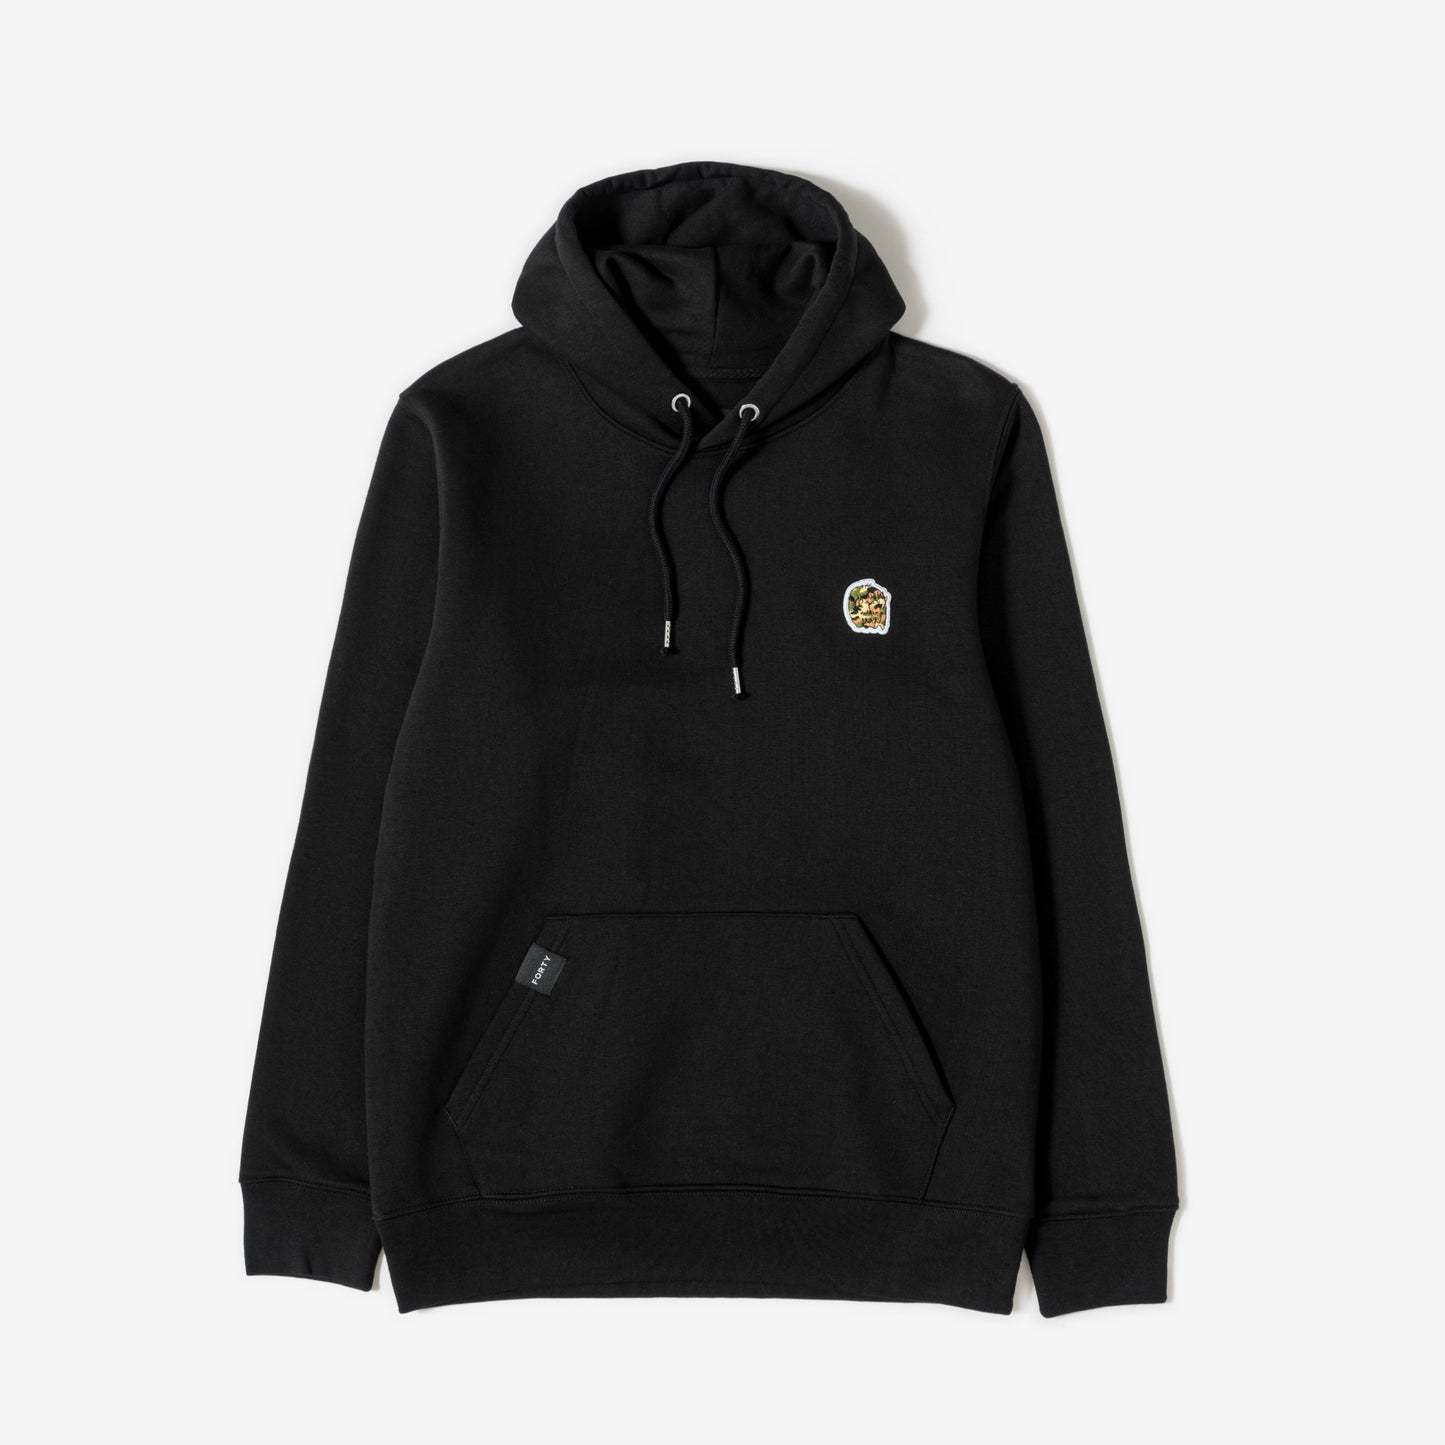 FORTY Tom Hoodie (Black) xccscss.